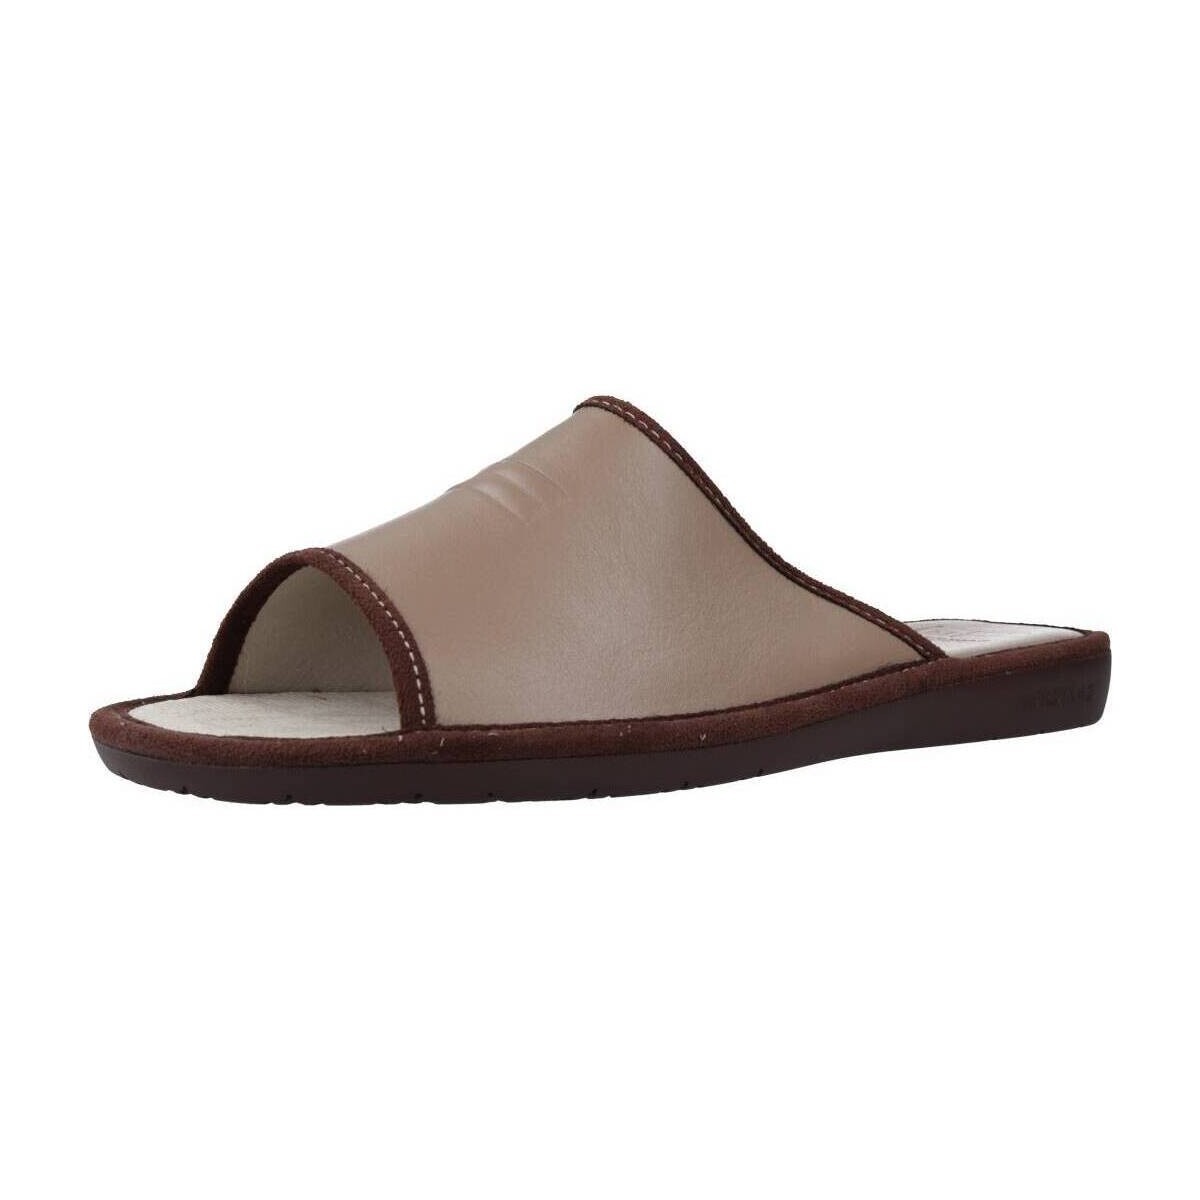 Man Slippers in Brown at Spartoo GOOFASH